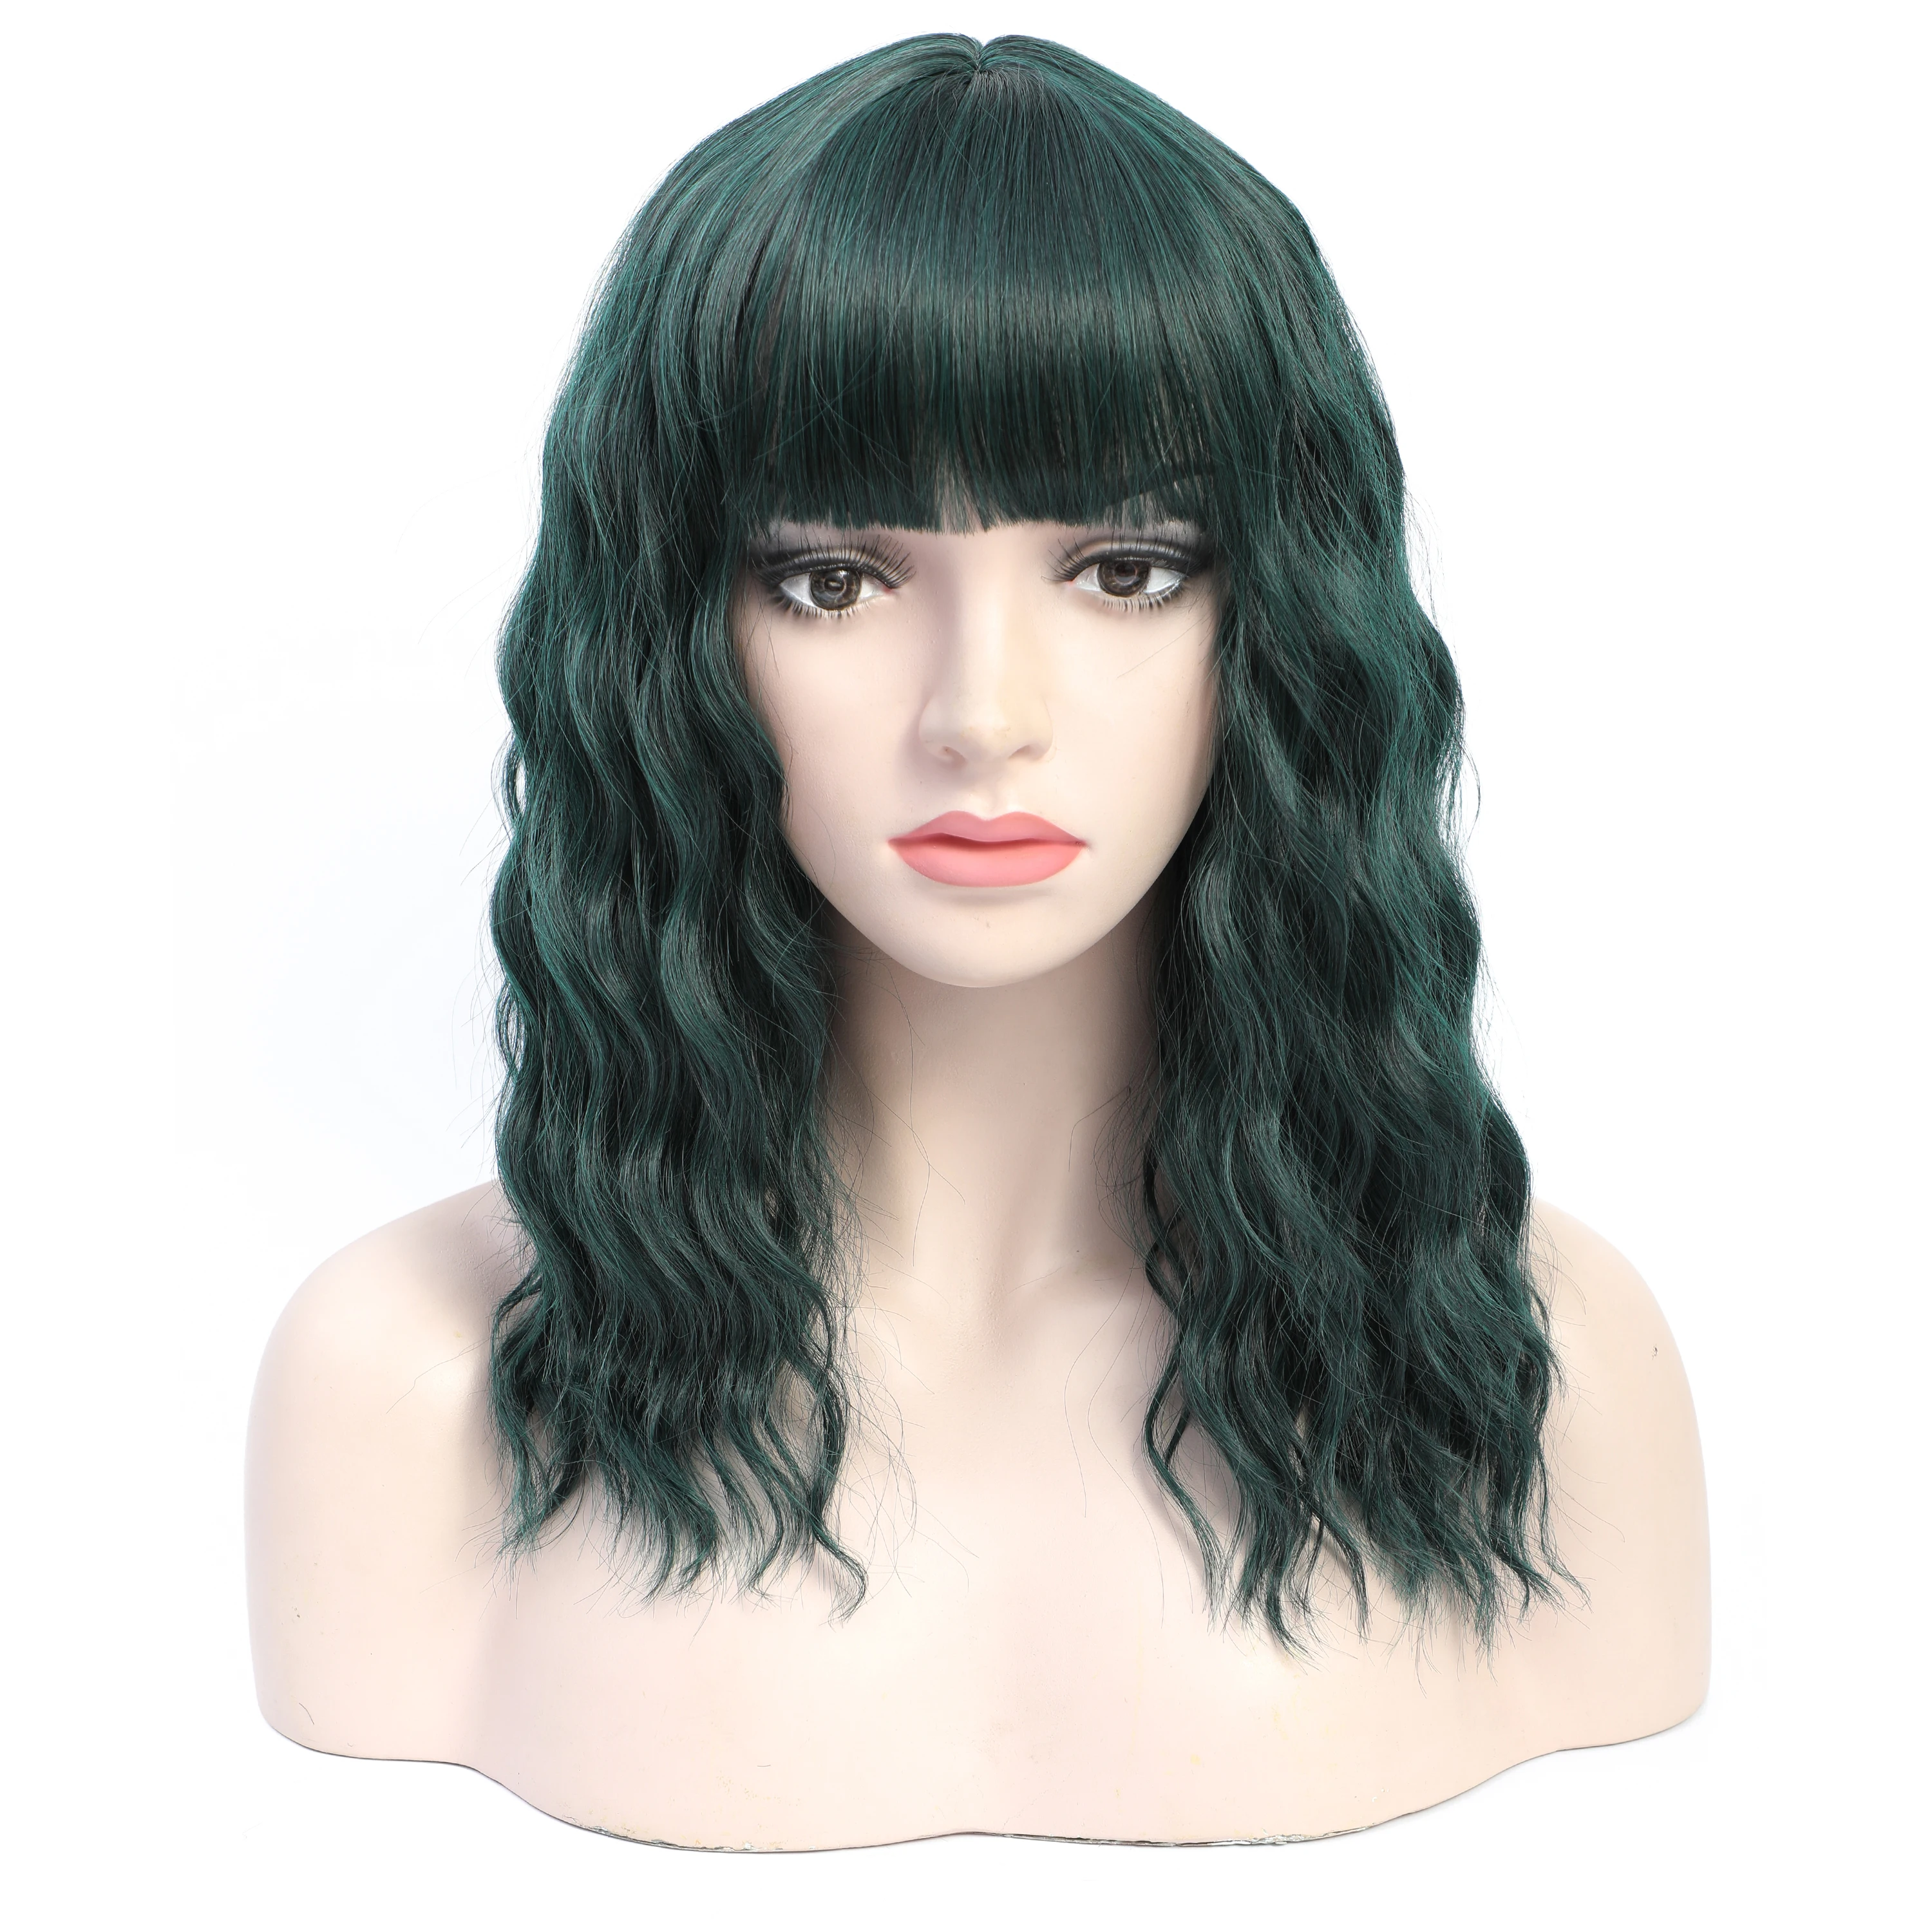 

LANYI 16Inches Long Wavy Wigs For Women Green Synthetic Wigs with Bangs For Femal Daily Use Cosplay Lolita Wigs Heat Resistant